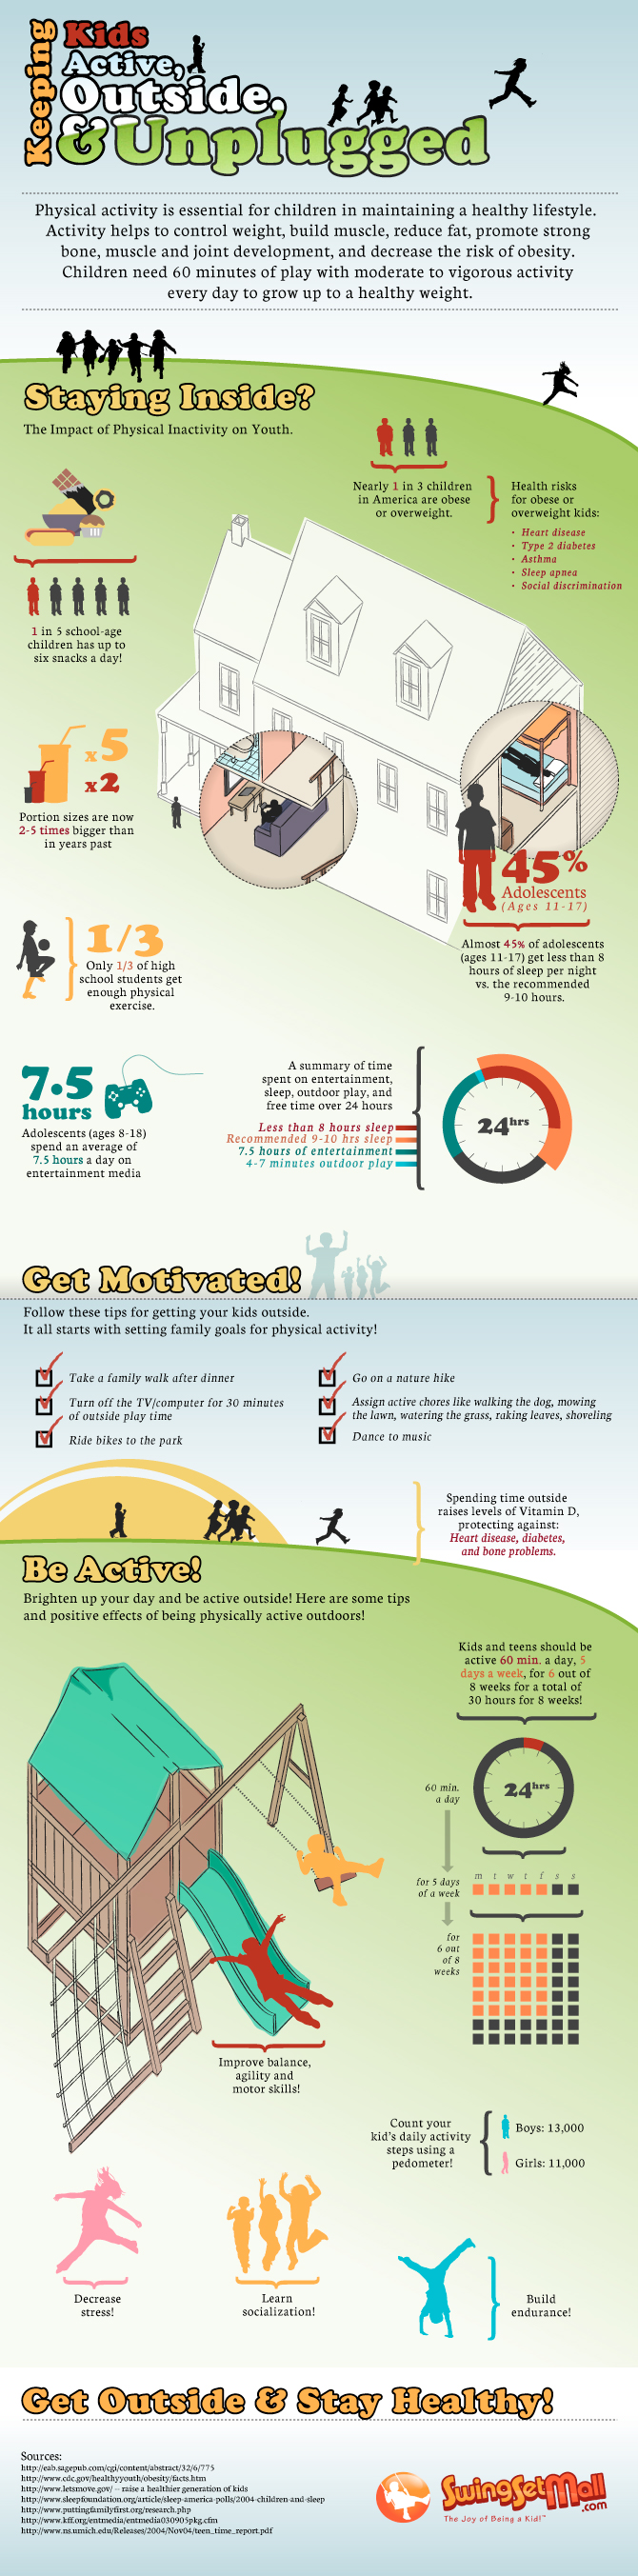 Keeping Kids Active Infographic